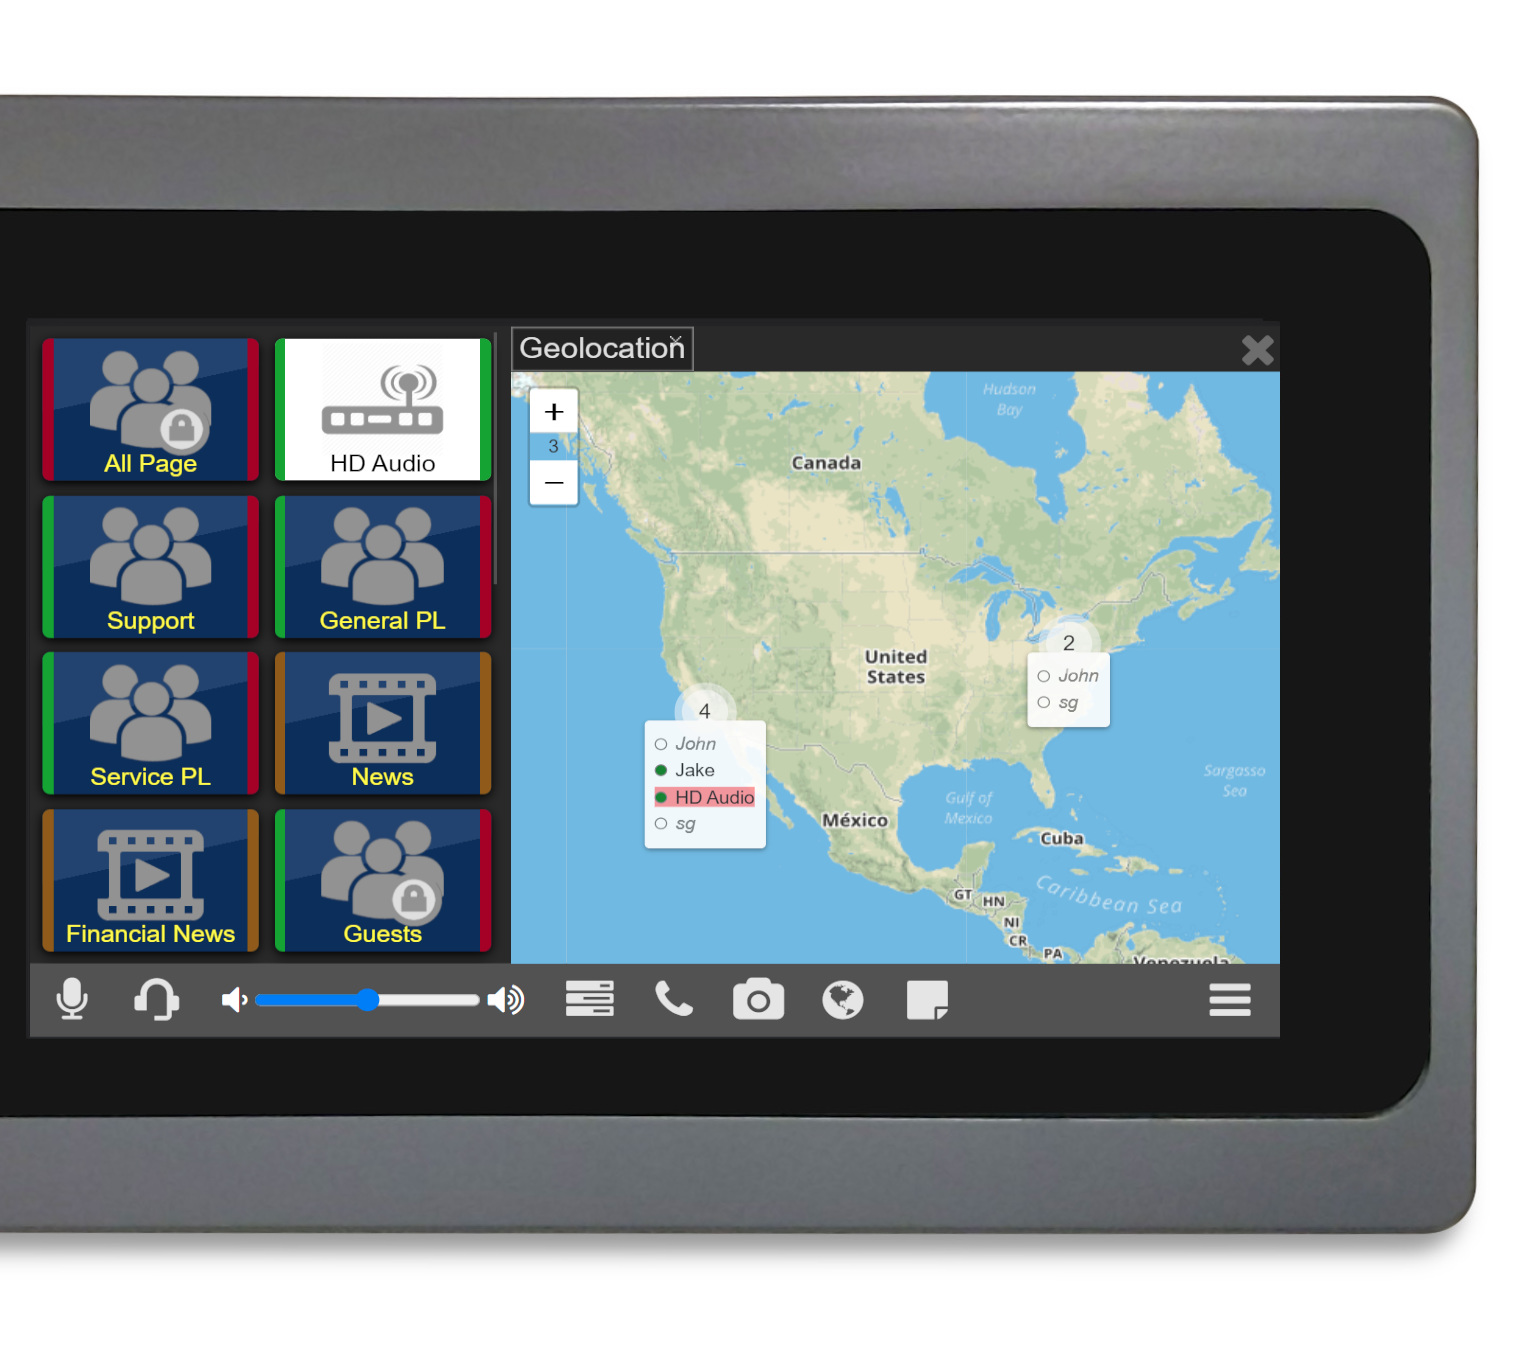 VCOM Desktop Control Panel D406 showing geolocation map with user locations